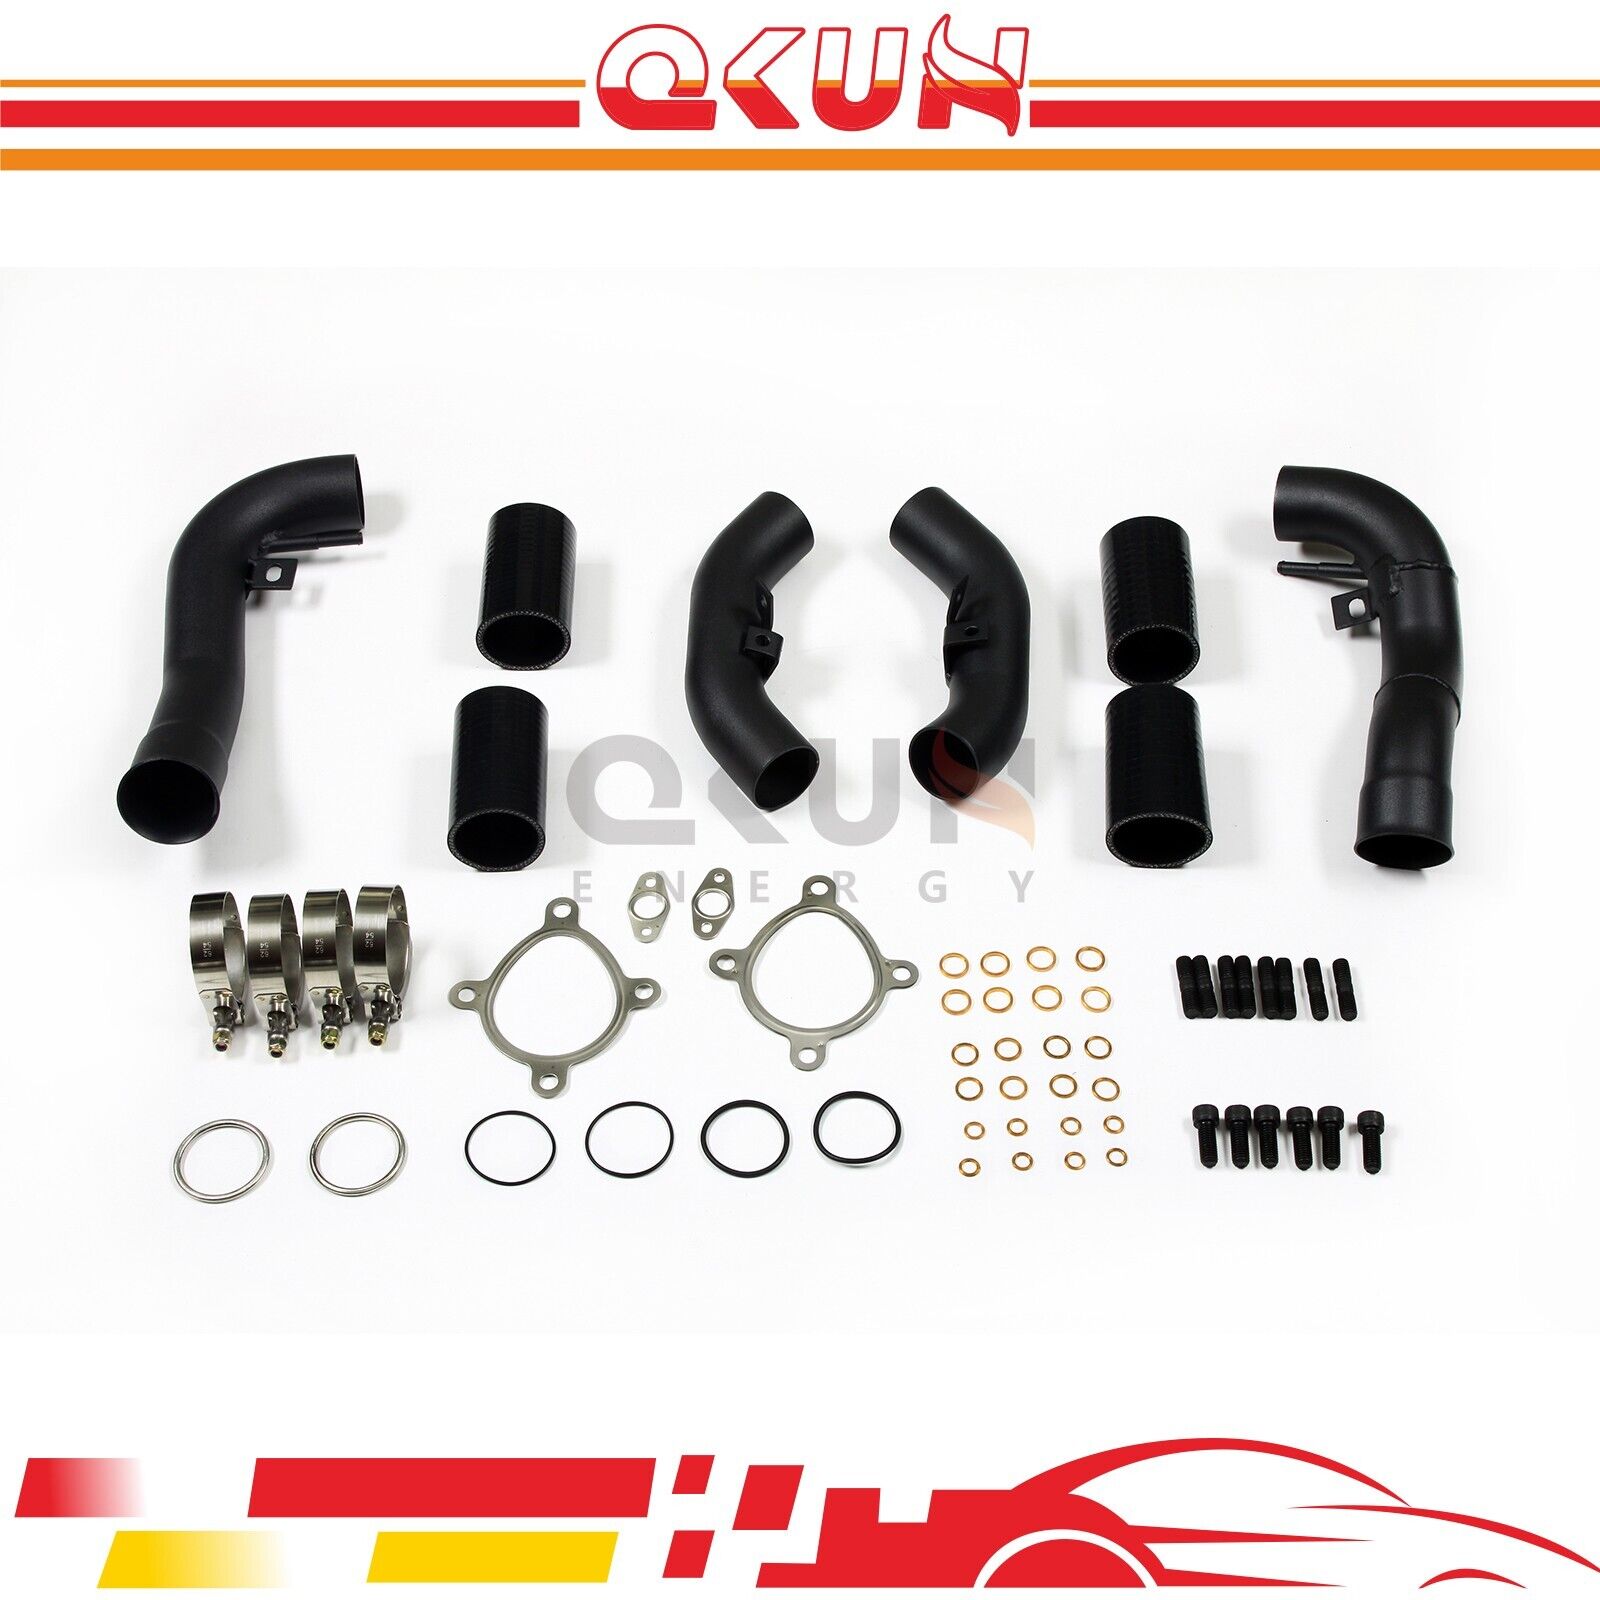 FOR AUDI A6 2.7L FOR ALLROAD RS4 S4 B5 K04 TURBO INLET PIPES